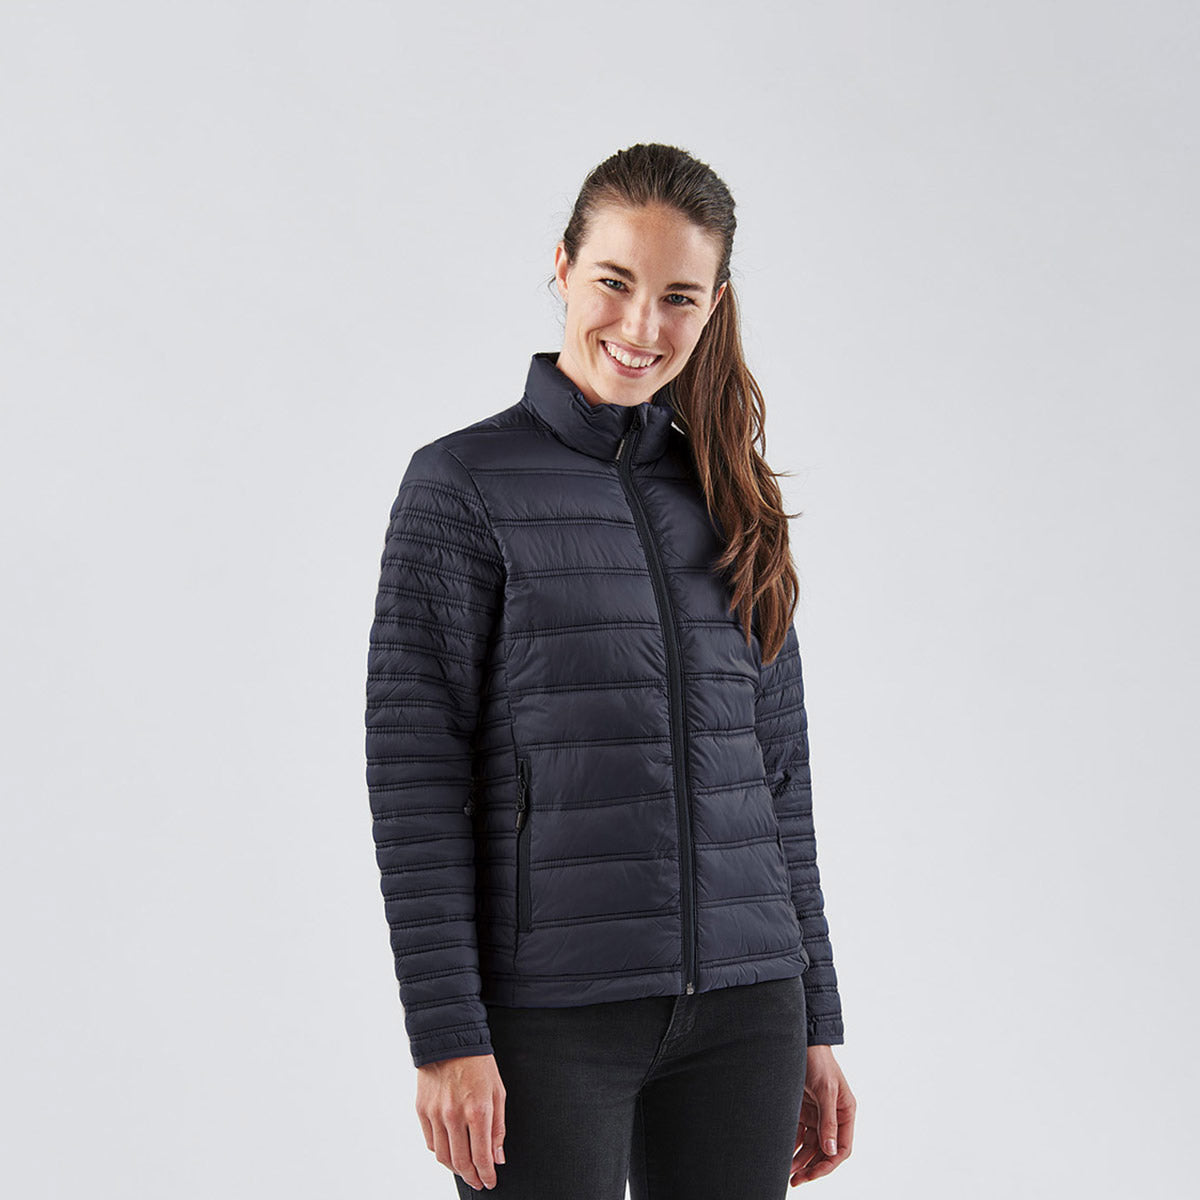 Which fleece jacket is better in your opinion? Trying to get one. : r/uniqlo